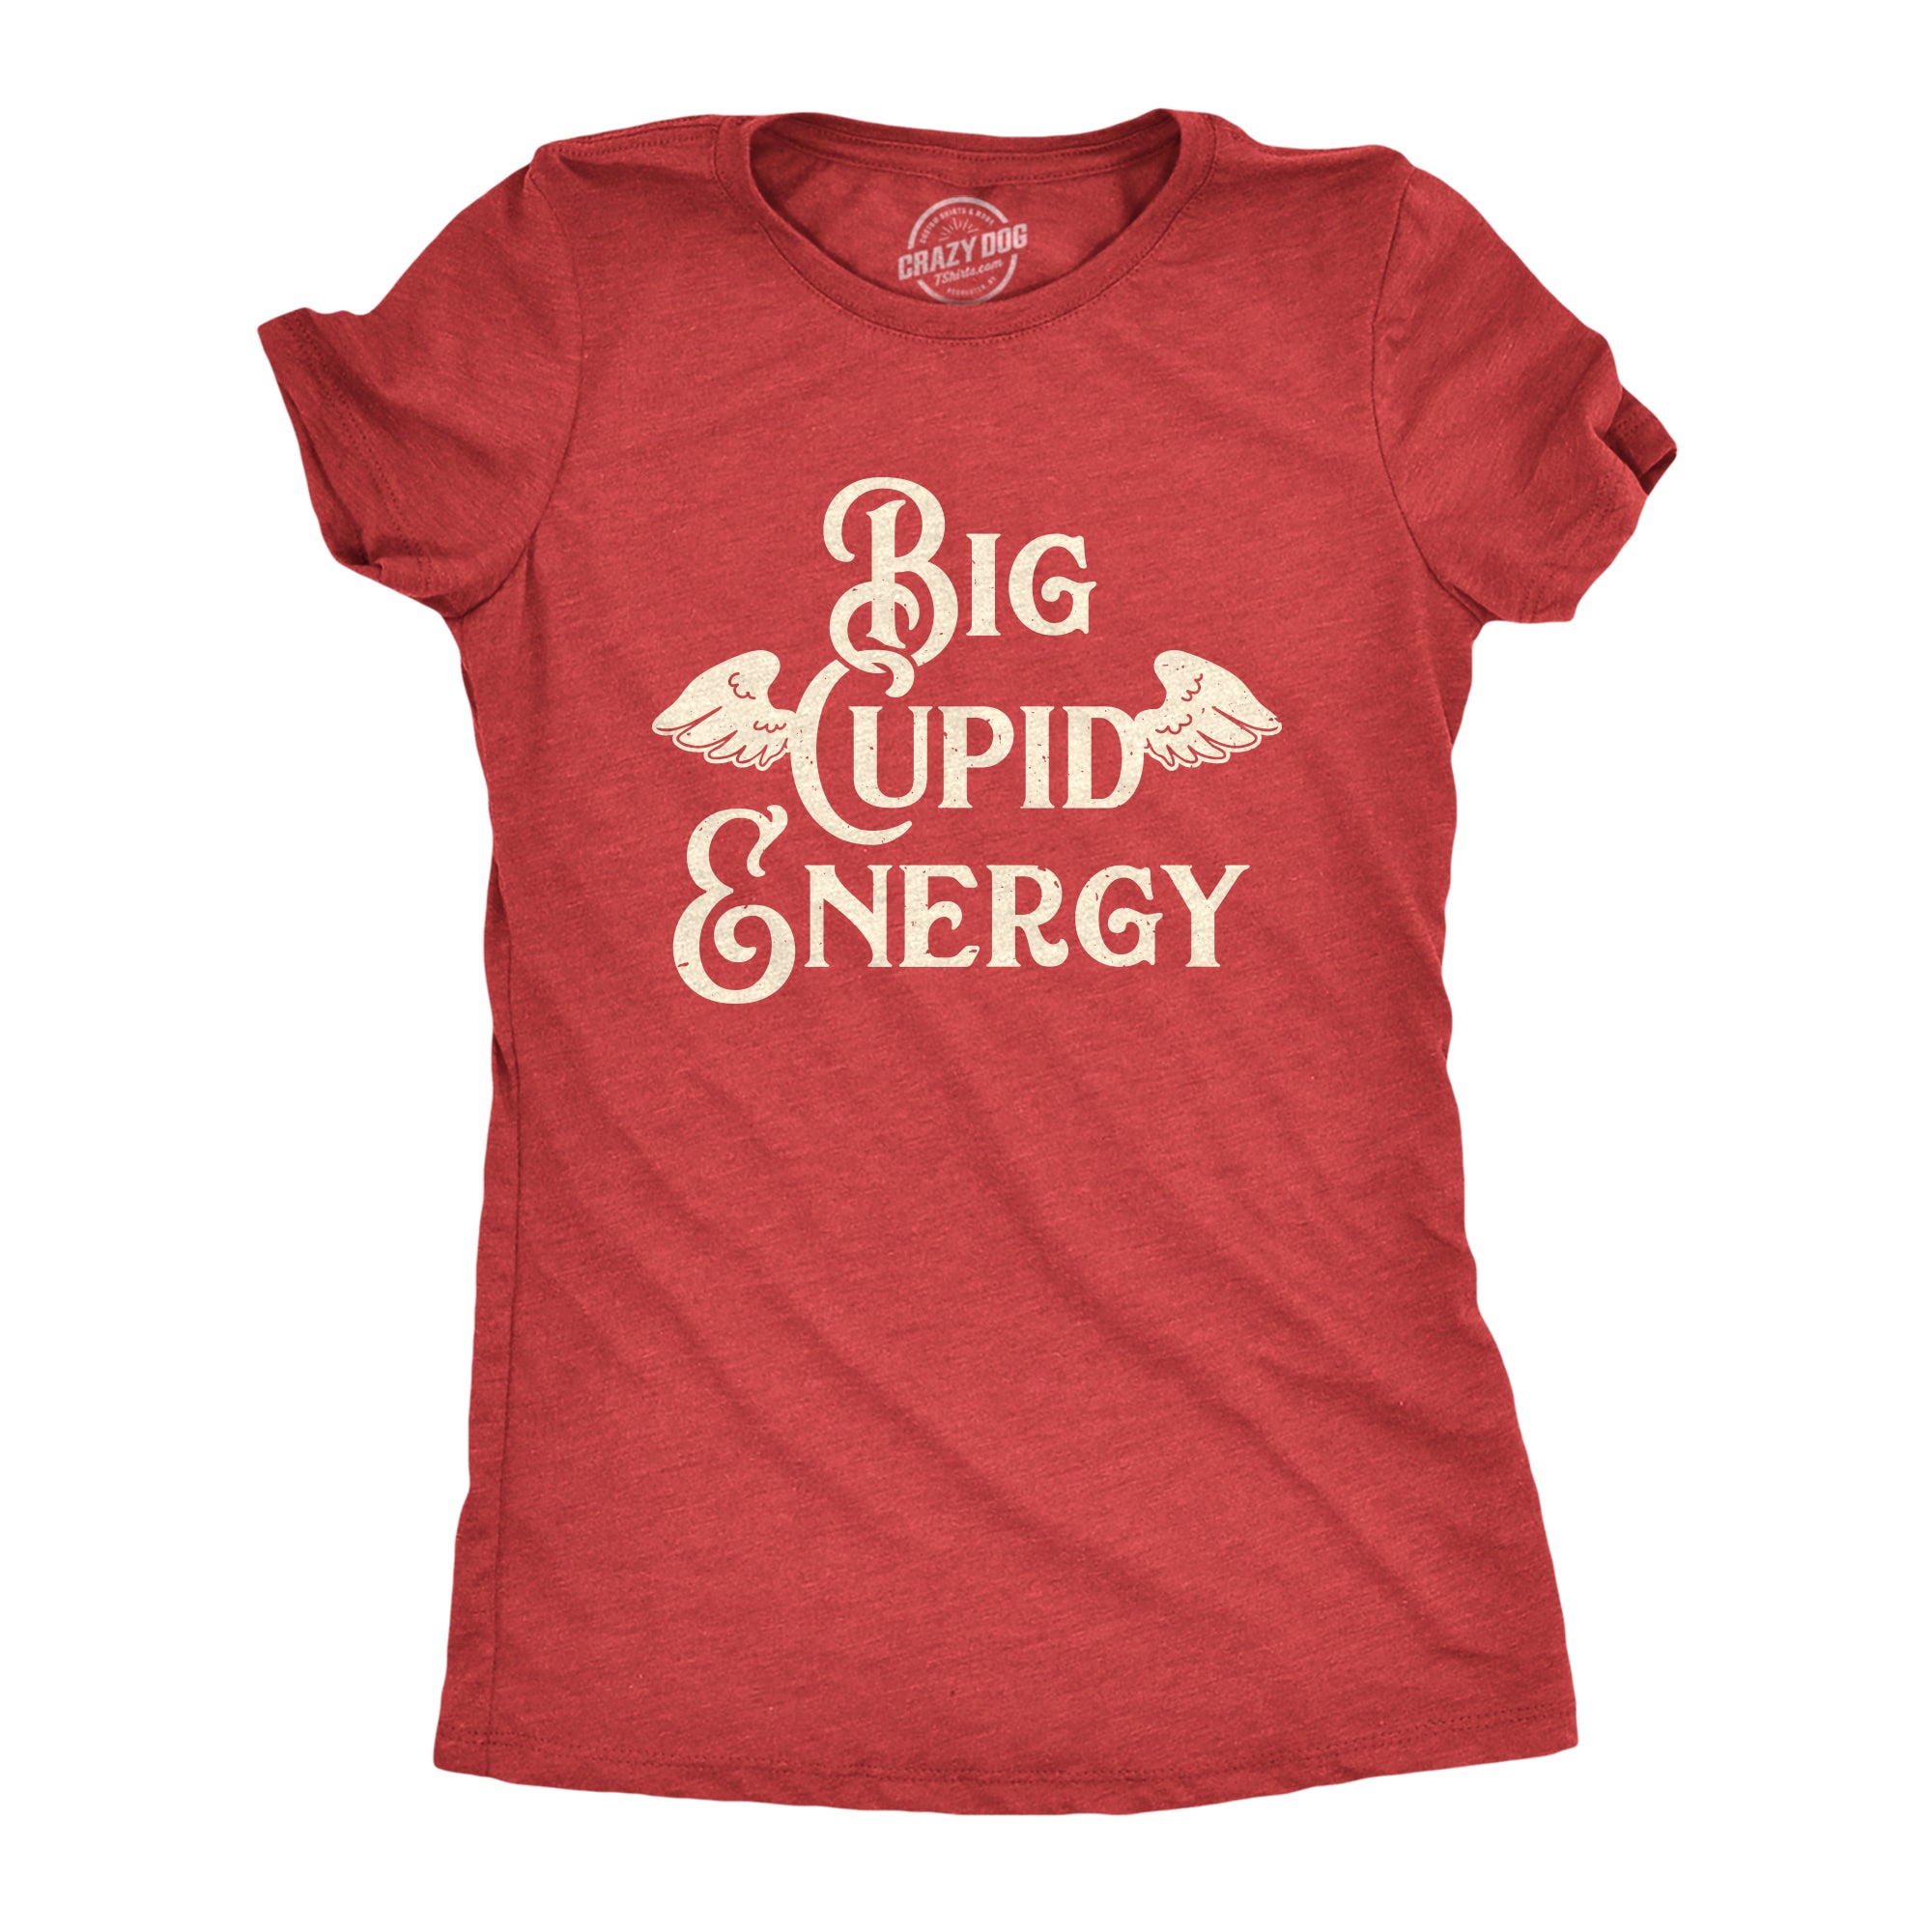 Funny Heather Red - CUPID Big Cupid Energy Womens T Shirt Nerdy Valentine's Day Sarcastic Tee